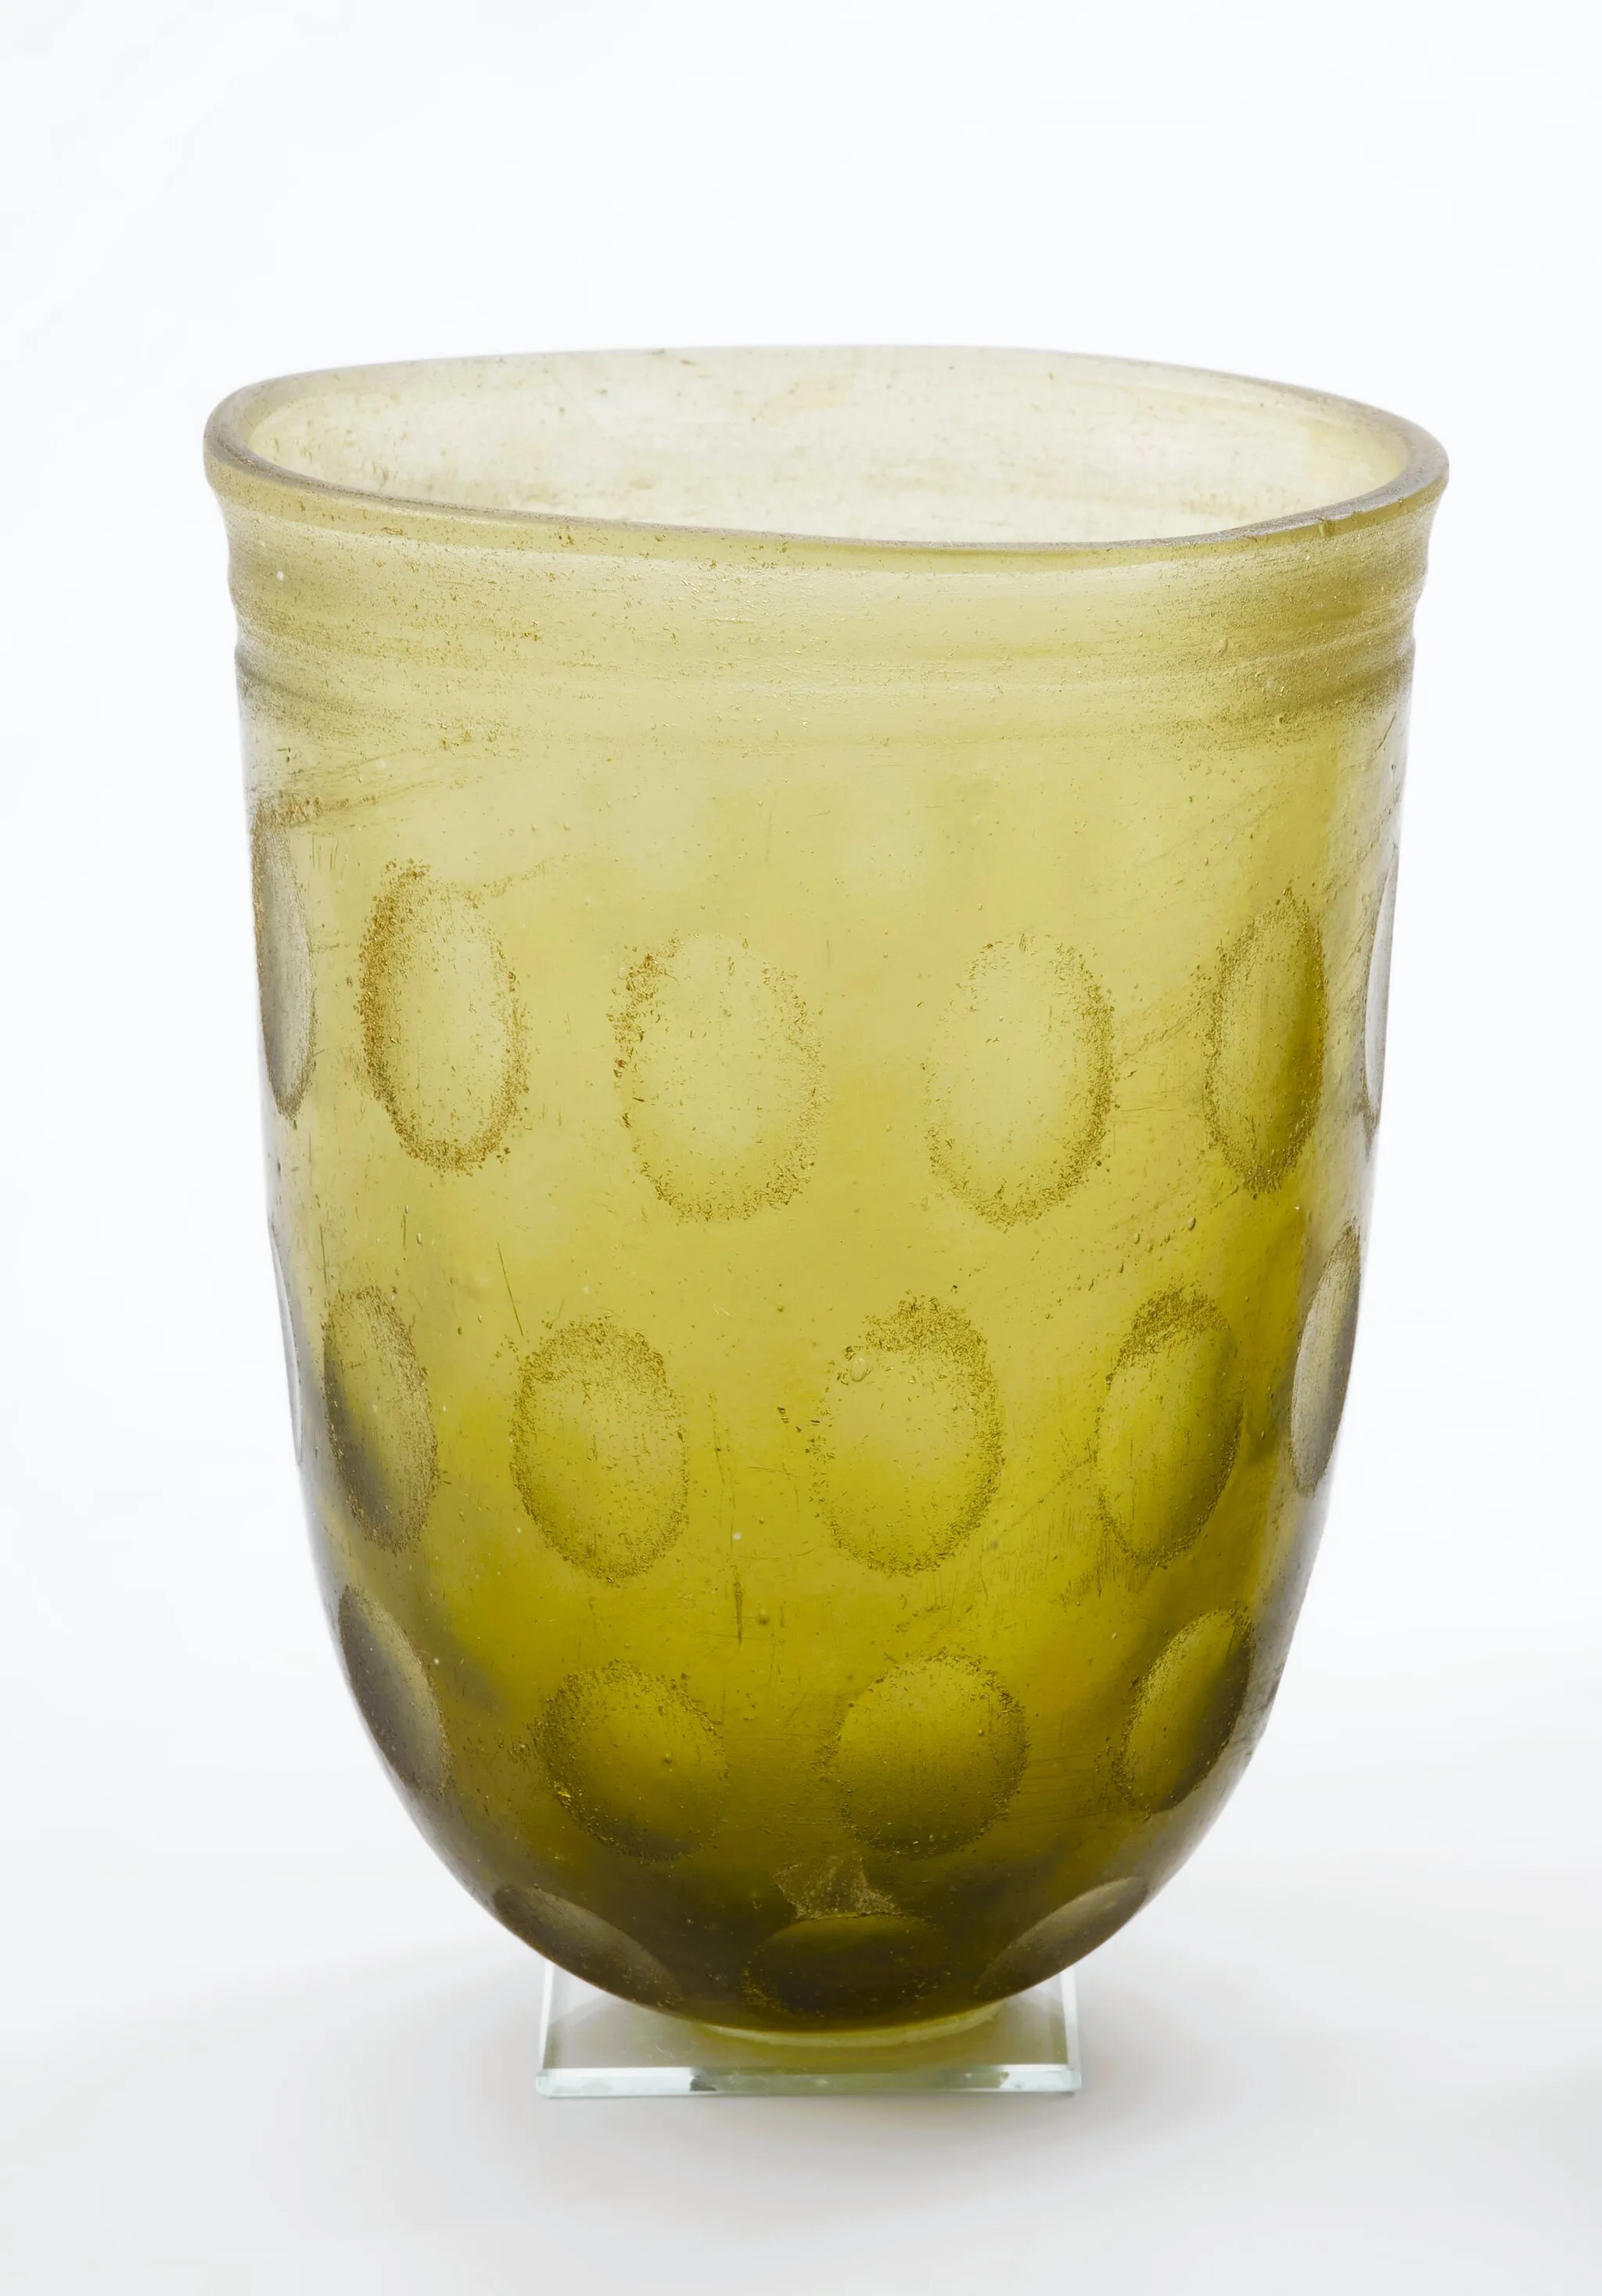 Photo showing: MNS/A/22211 The glass vessel (beaker) with thick walls, is light green and decorated with polished ovals, arranged in a system of four stripes running around the vessel, and two lines engraved under the edge of the rim. The glass is transparent. It belongs to a group of glass vessels with a characteristic form and equally typical ornamentation, known in the literature as “Kowalki type” vessels. The name comes from another location in Western Pomerania.